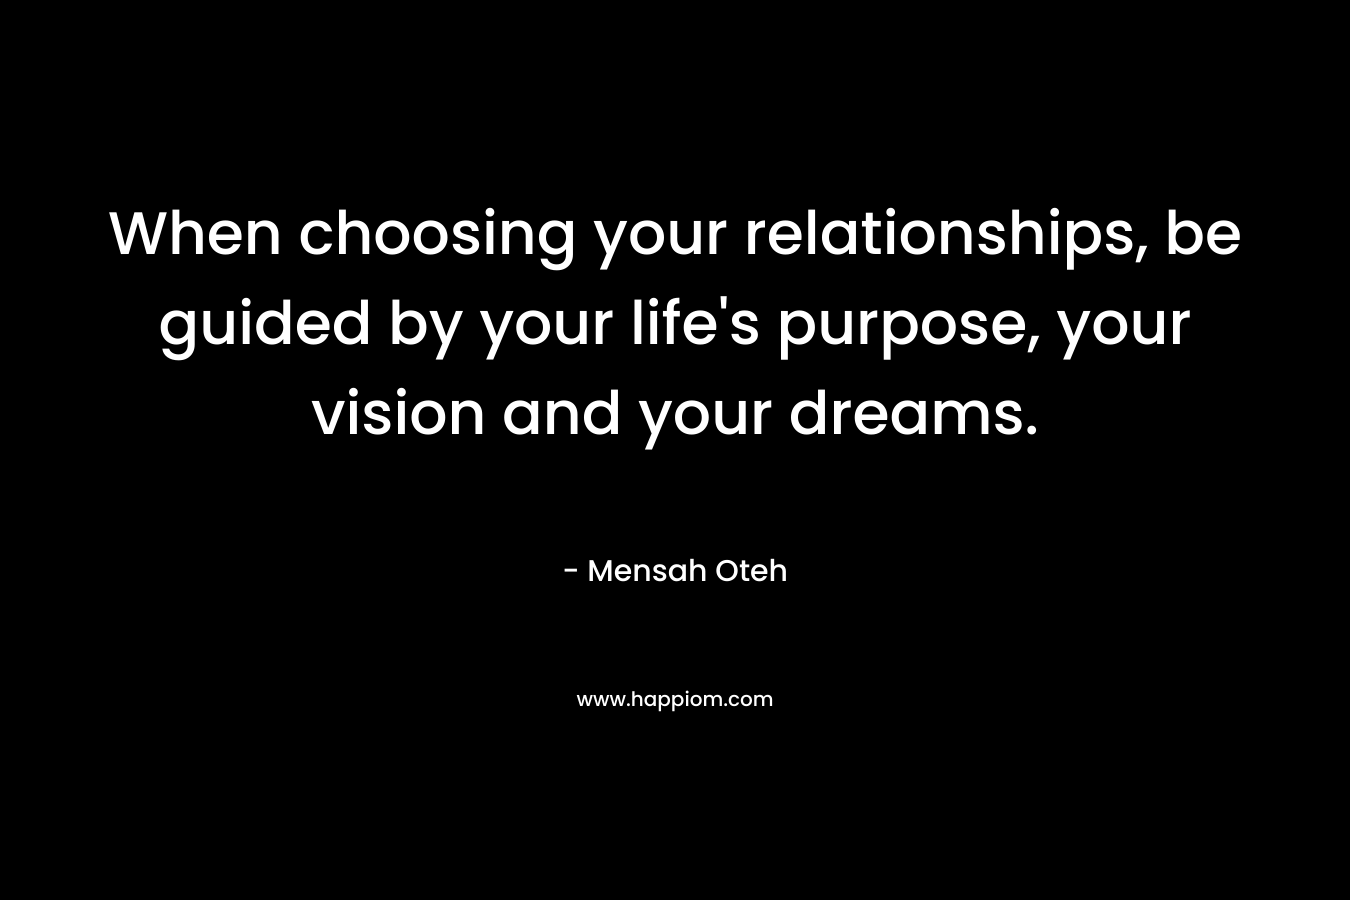 When choosing your relationships, be guided by your life's purpose, your vision and your dreams.